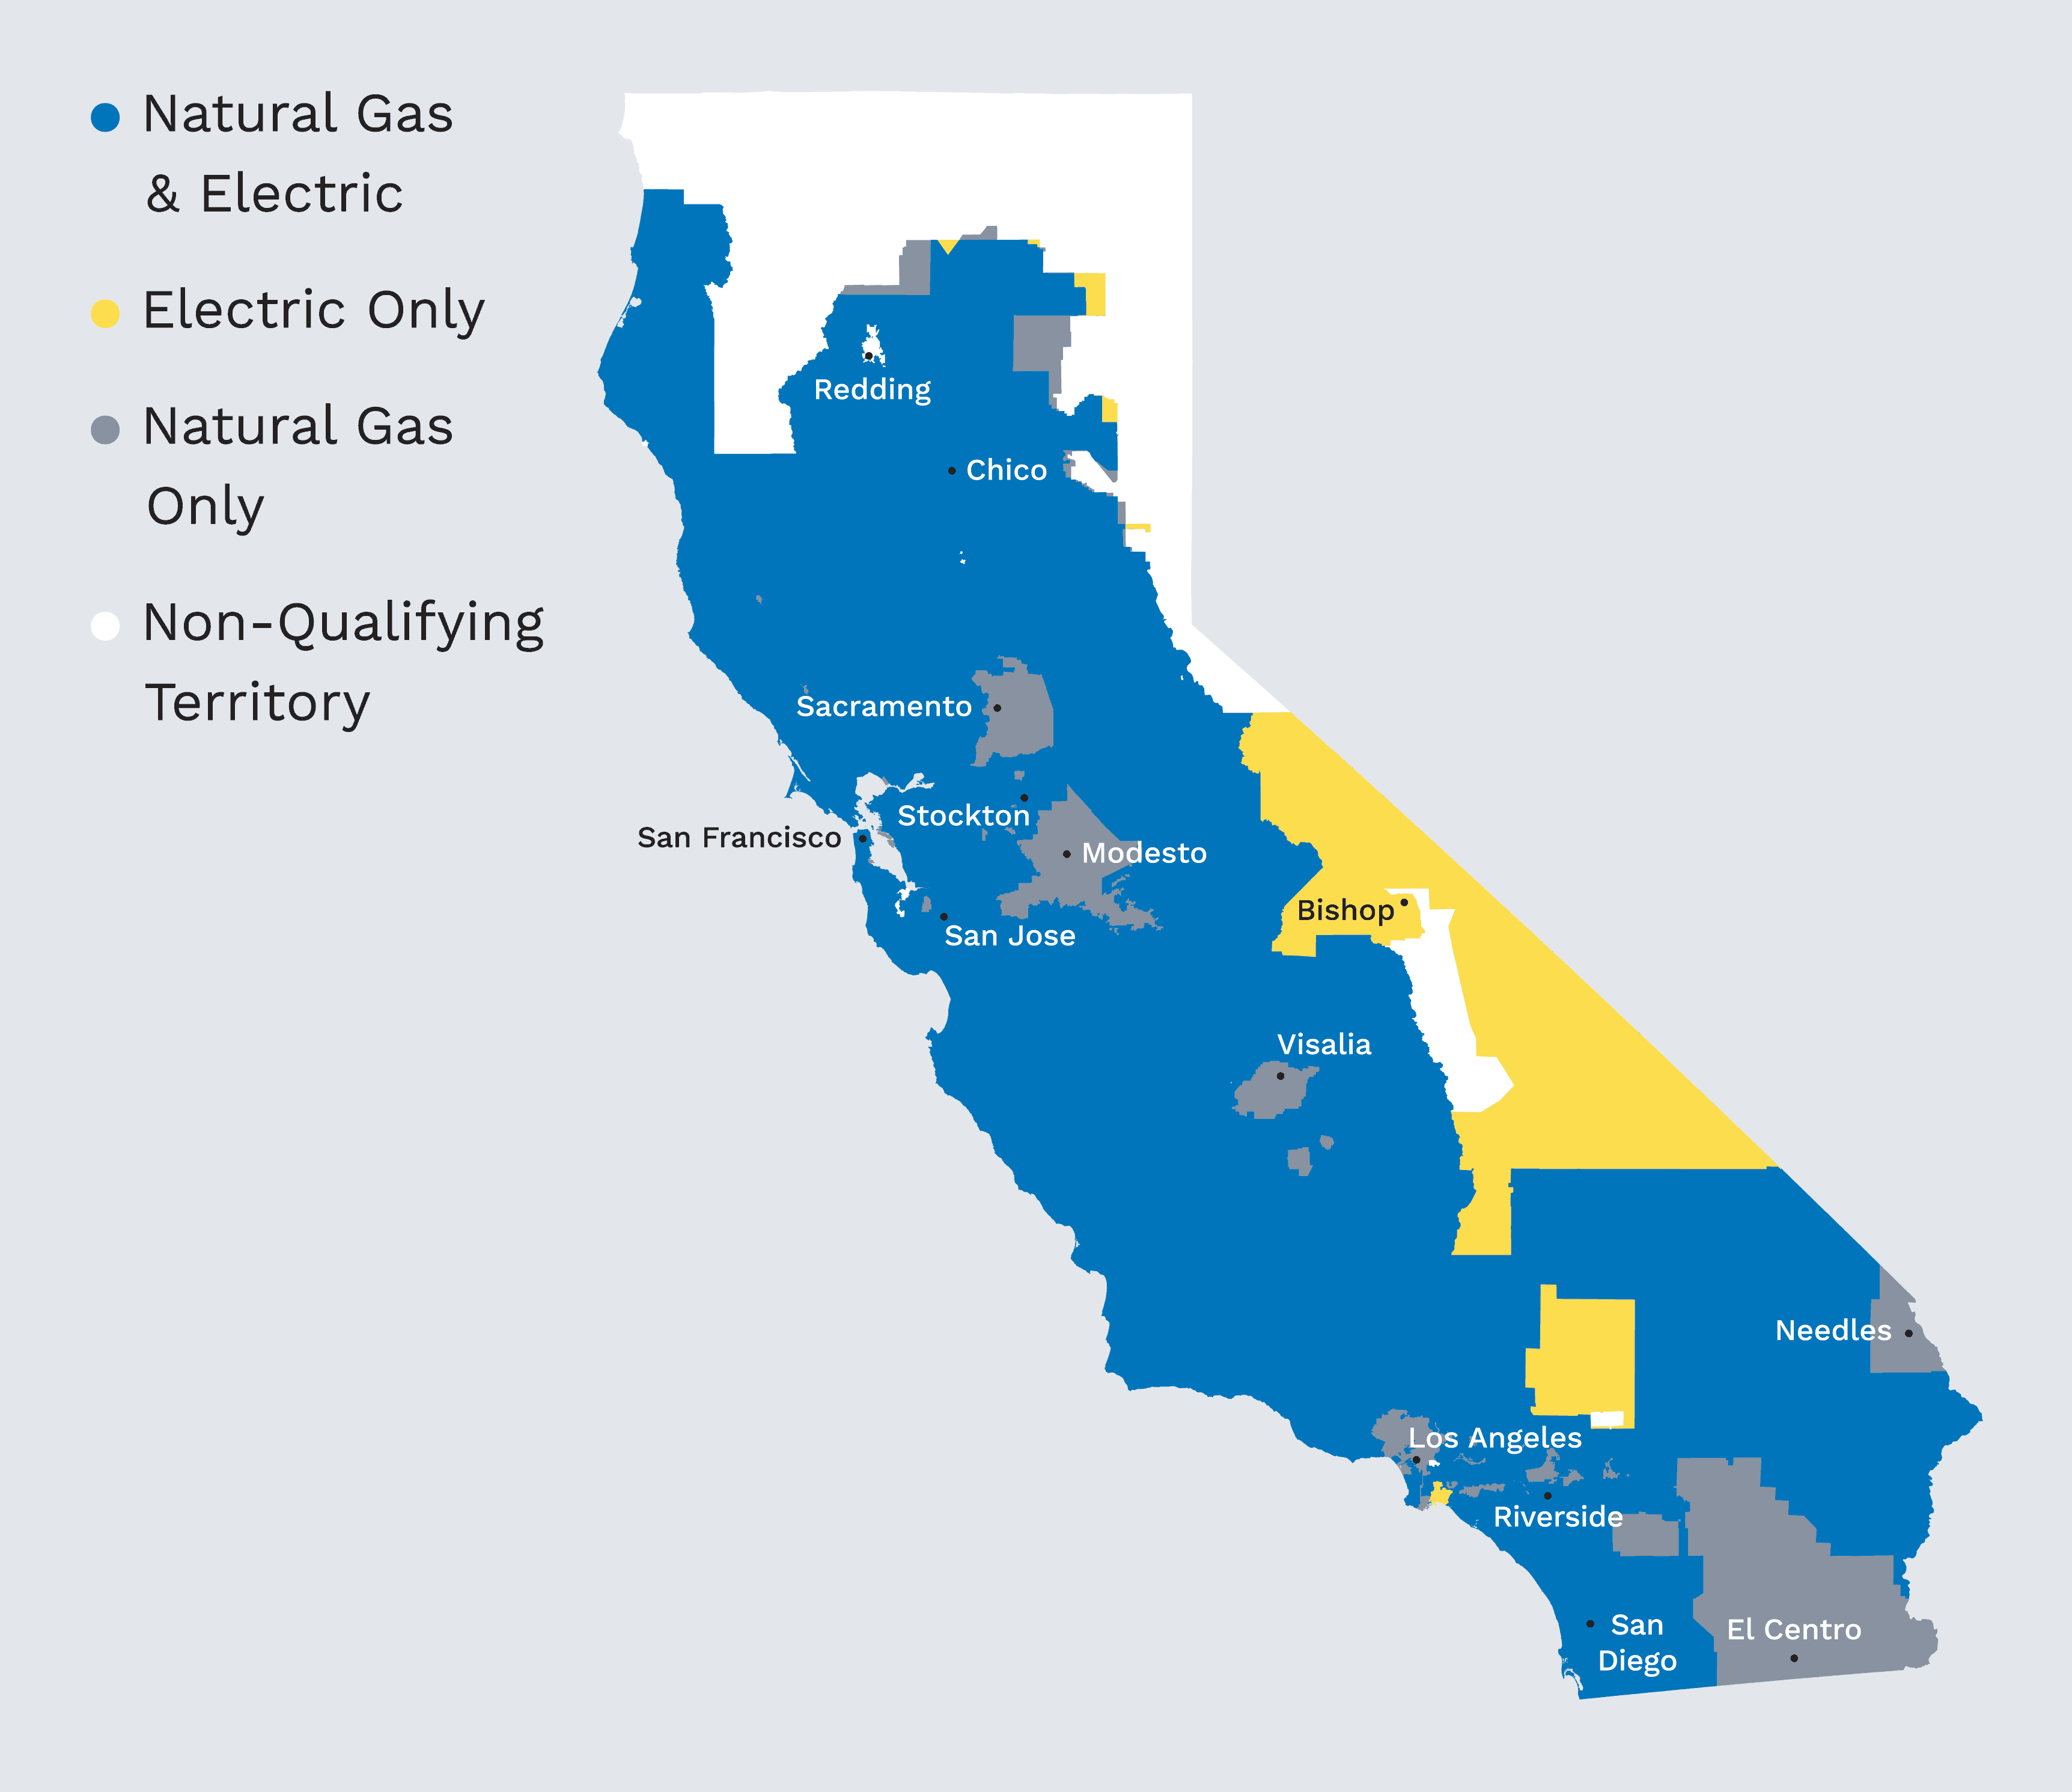 The state of California, showing 90% of its territory is eligible for Instant Rebates